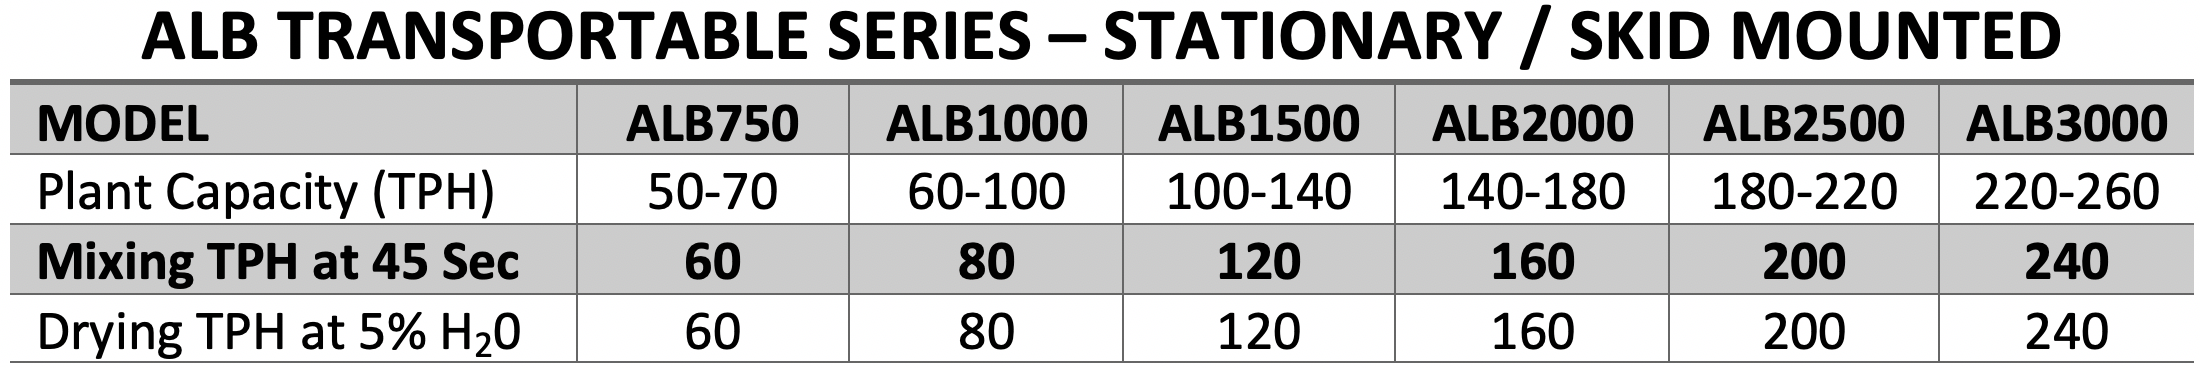 ALBTransportableSeriesProductionRates.png